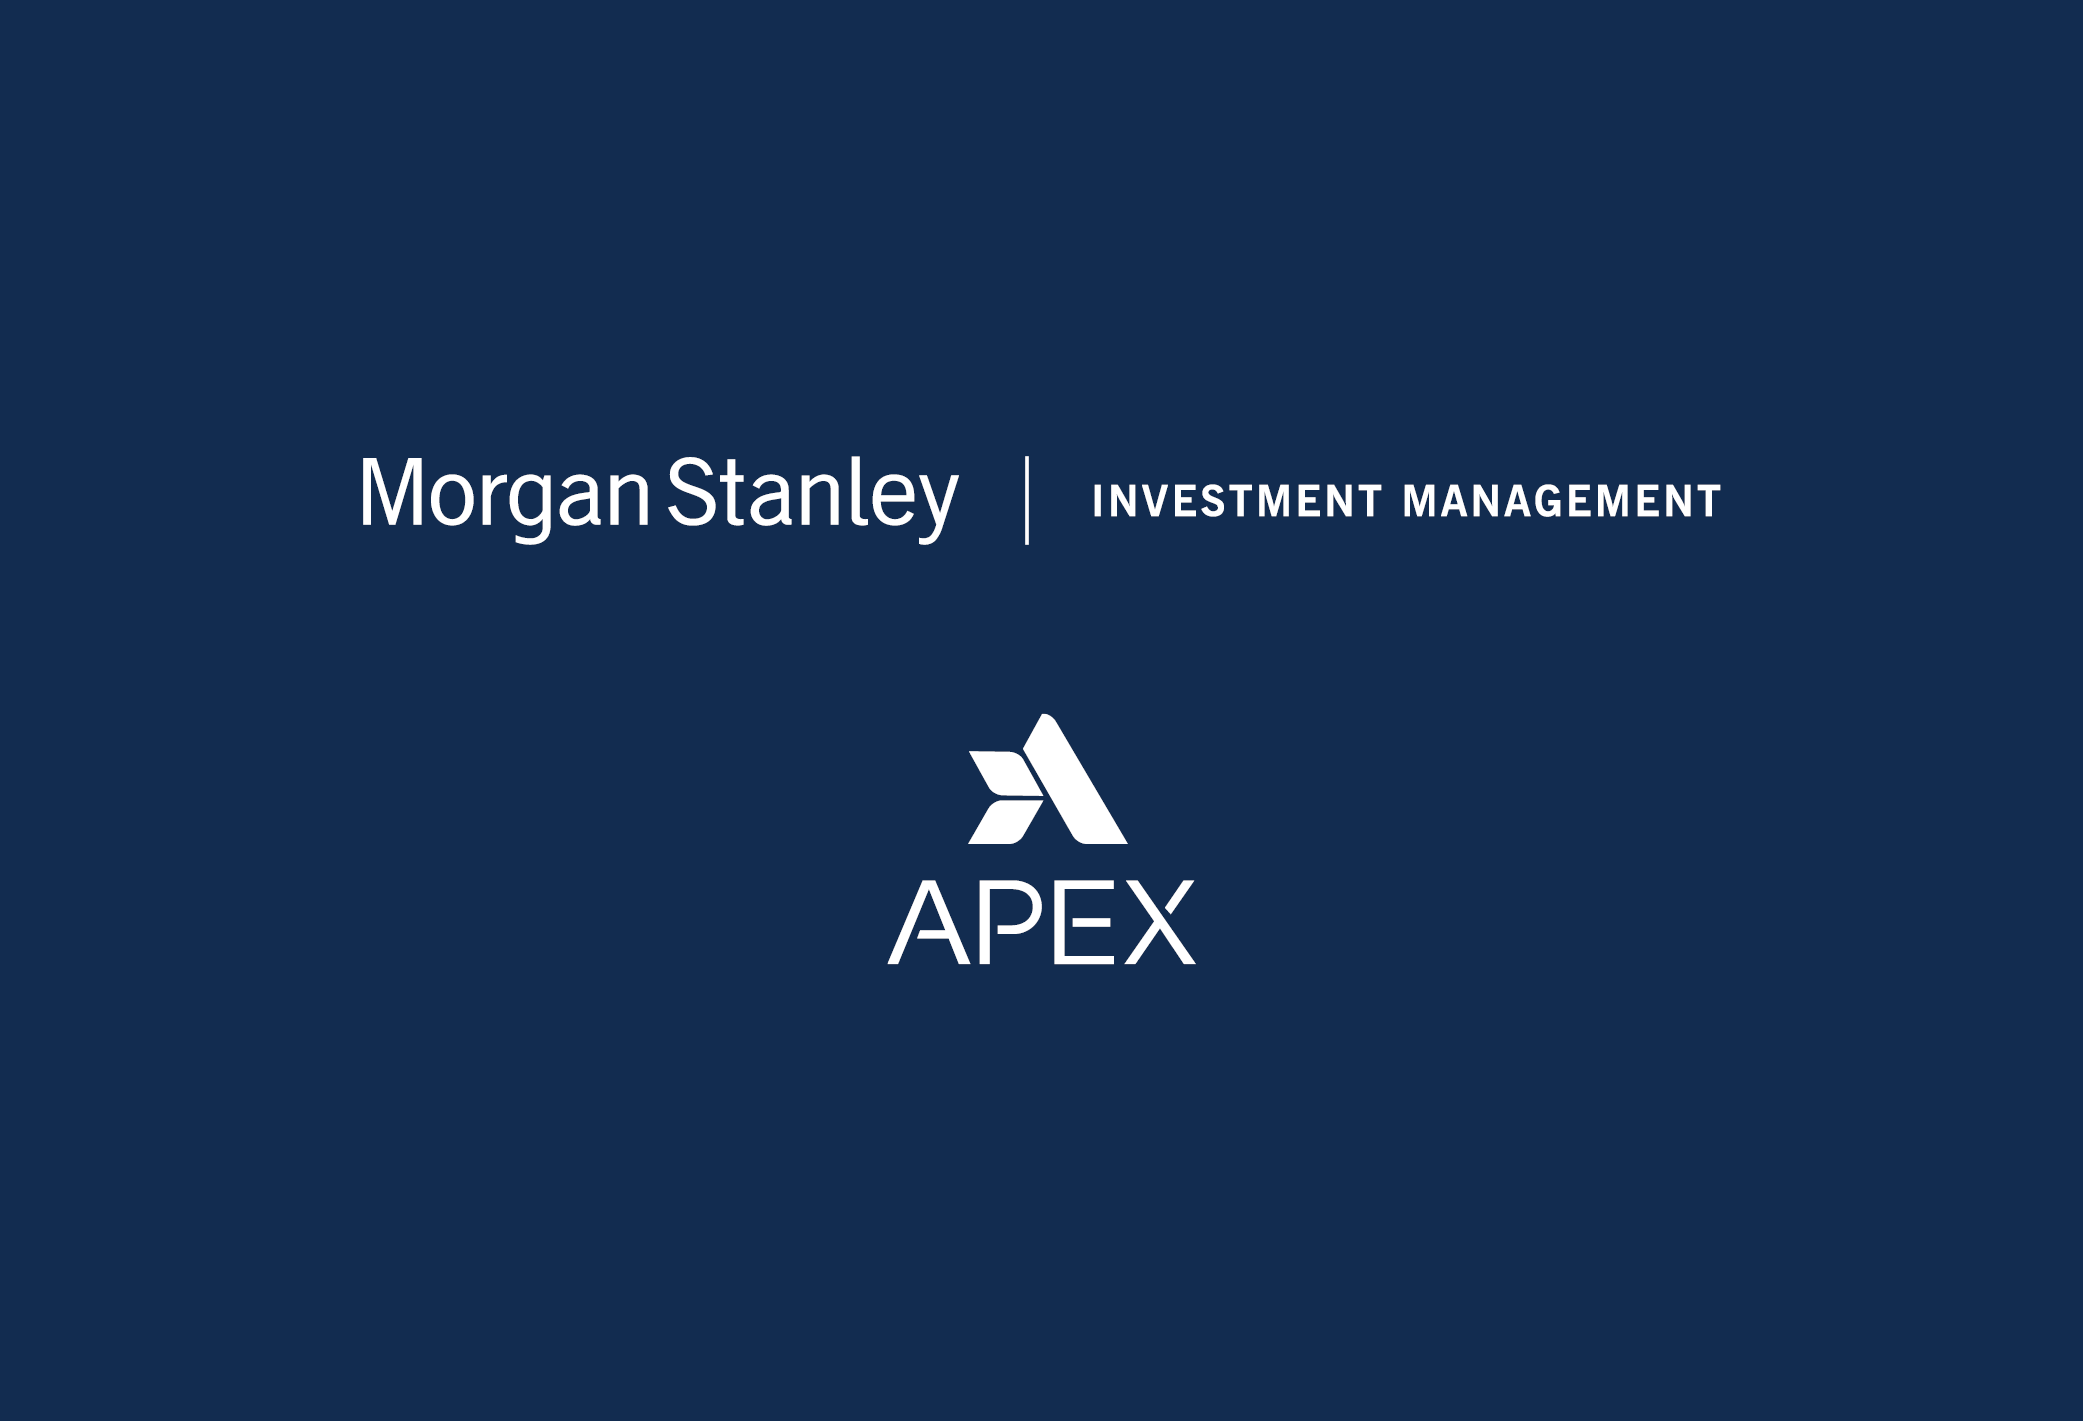 Logo lockup of Morgan Stanley Investment Management and Apex Companies